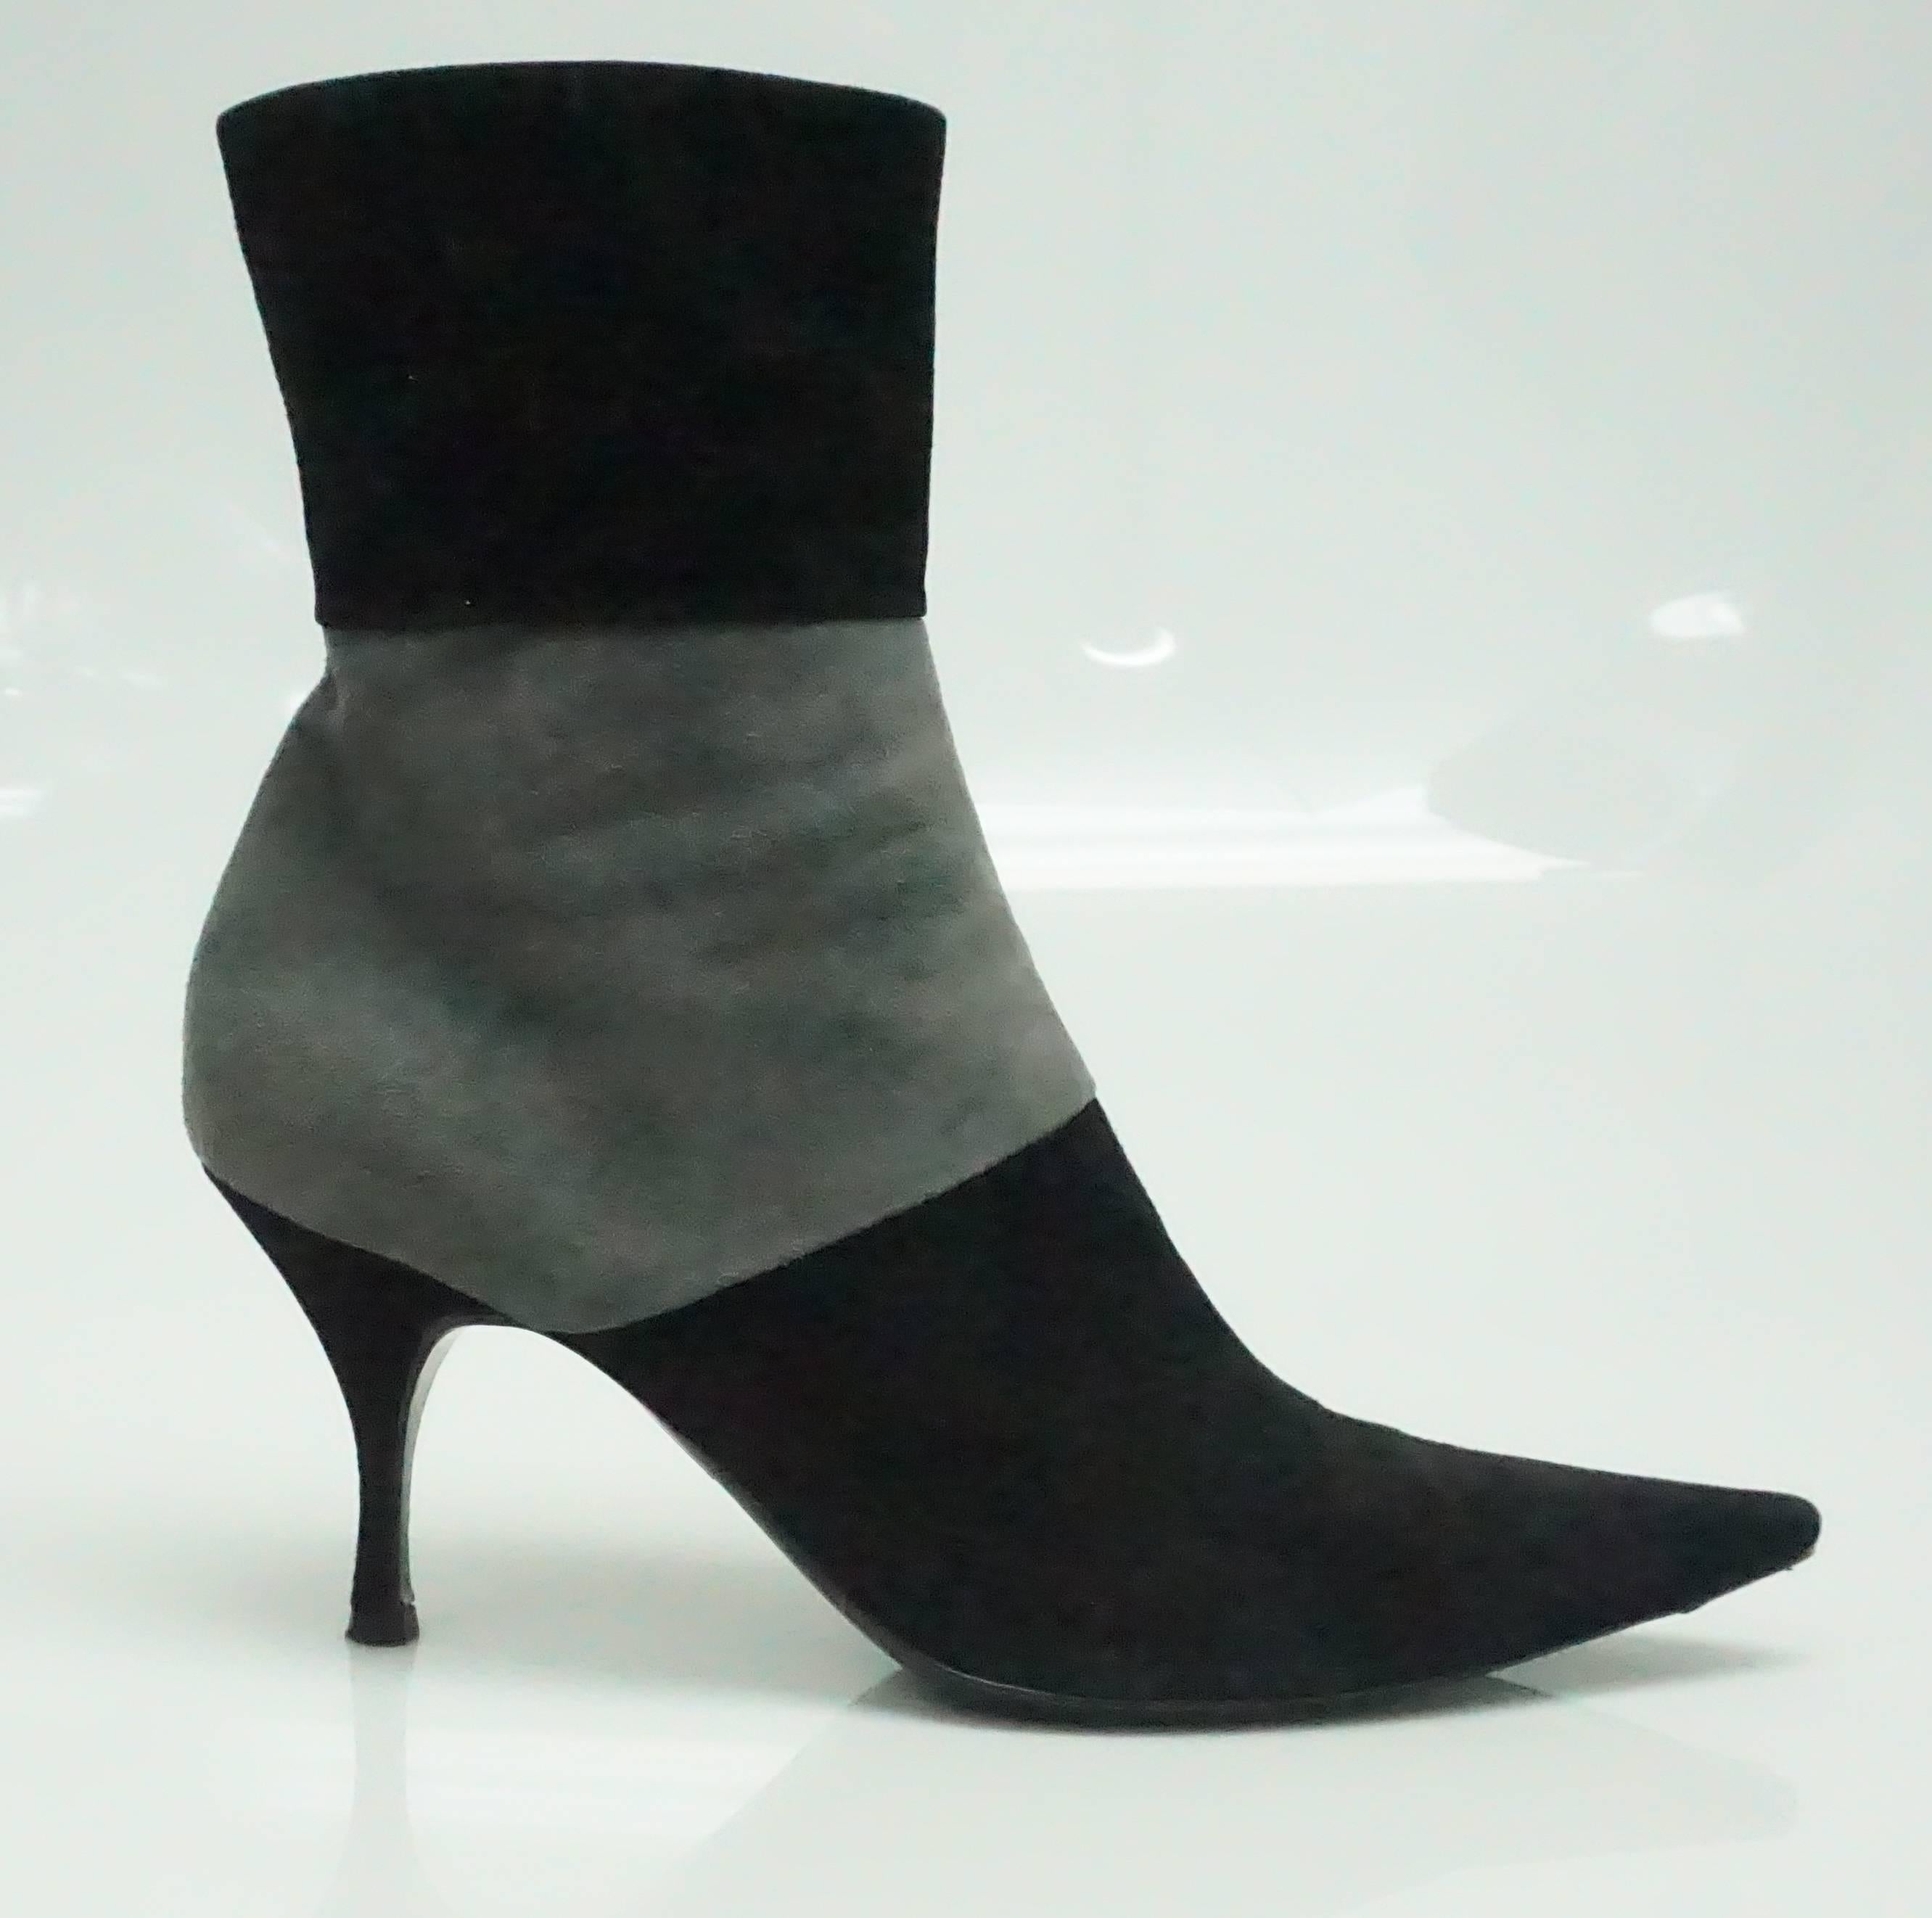 Sergio Rossi Black and Grey Suede Short Boot - 39.5  These sharp looking short boots are in very good condition. The go to just below the calf. The have a pointed toe and a side zip. The heel is a stiletto and is 3.25